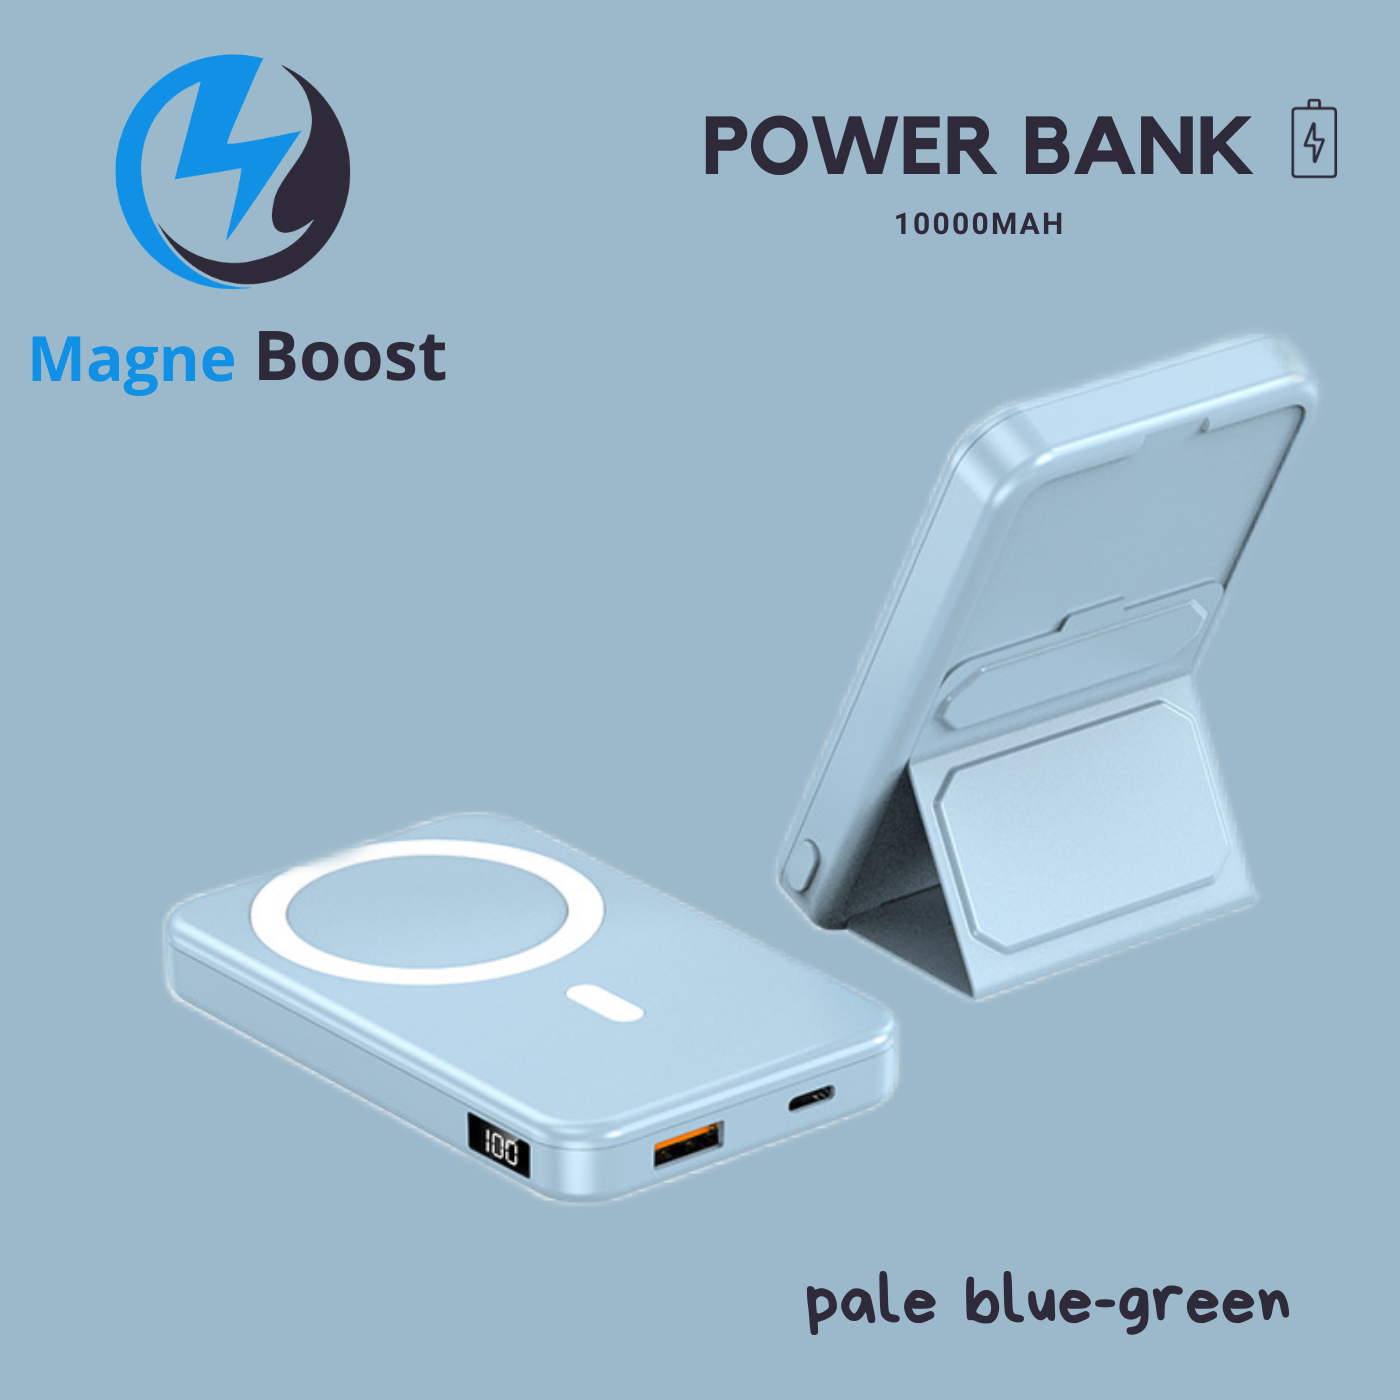 MagneBoost Charge+ and Charge++ (10000mAh and 20000mAh)